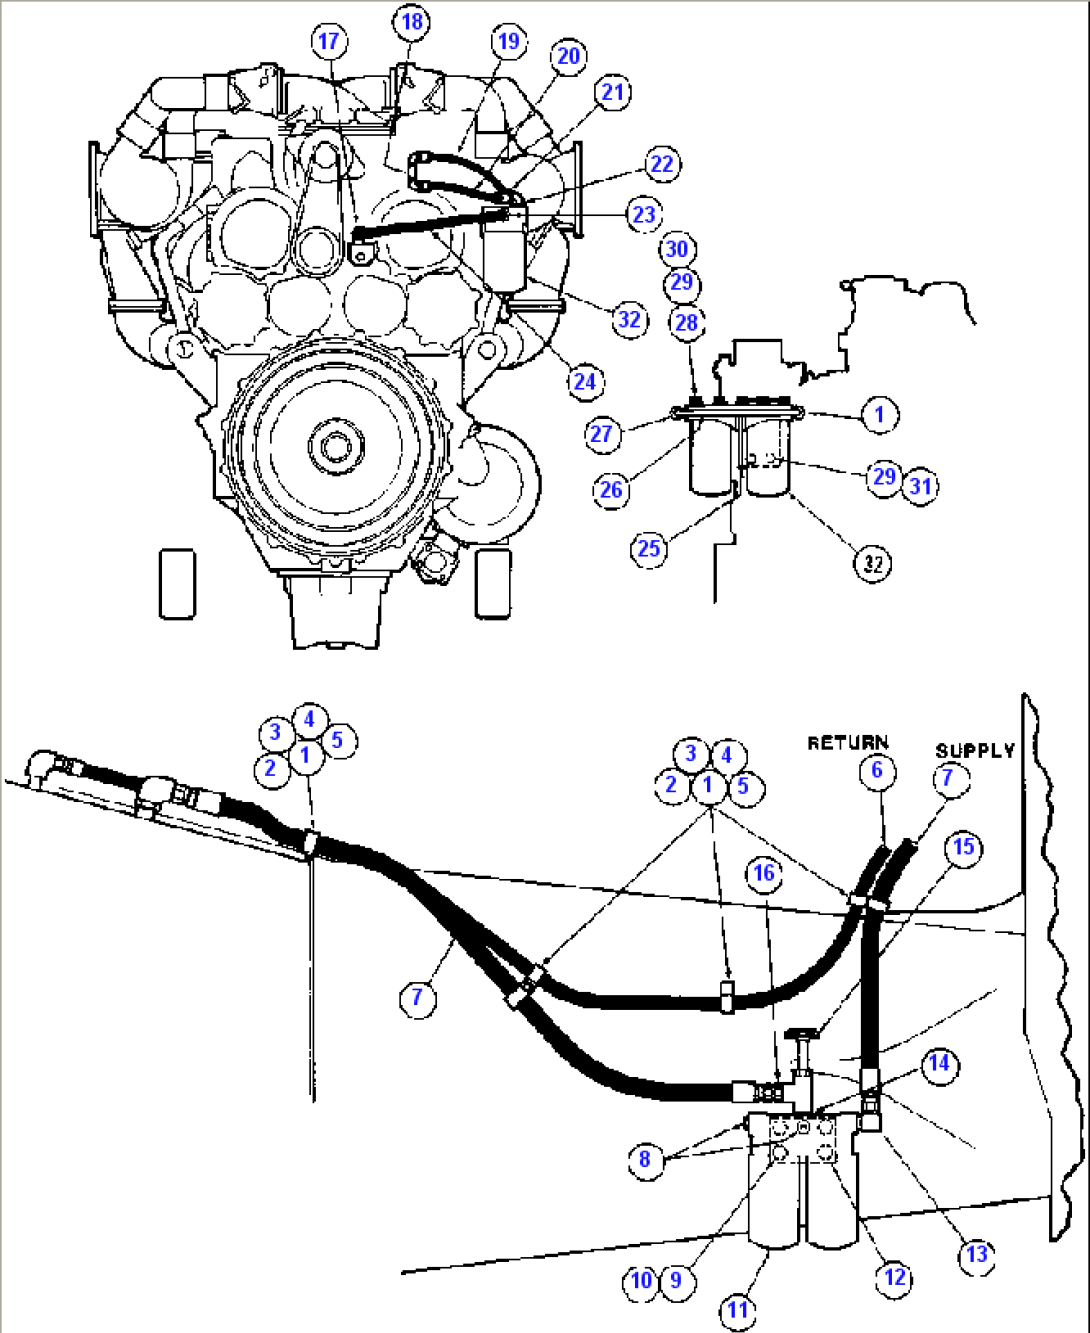 FUEL SYSTEM PIPING